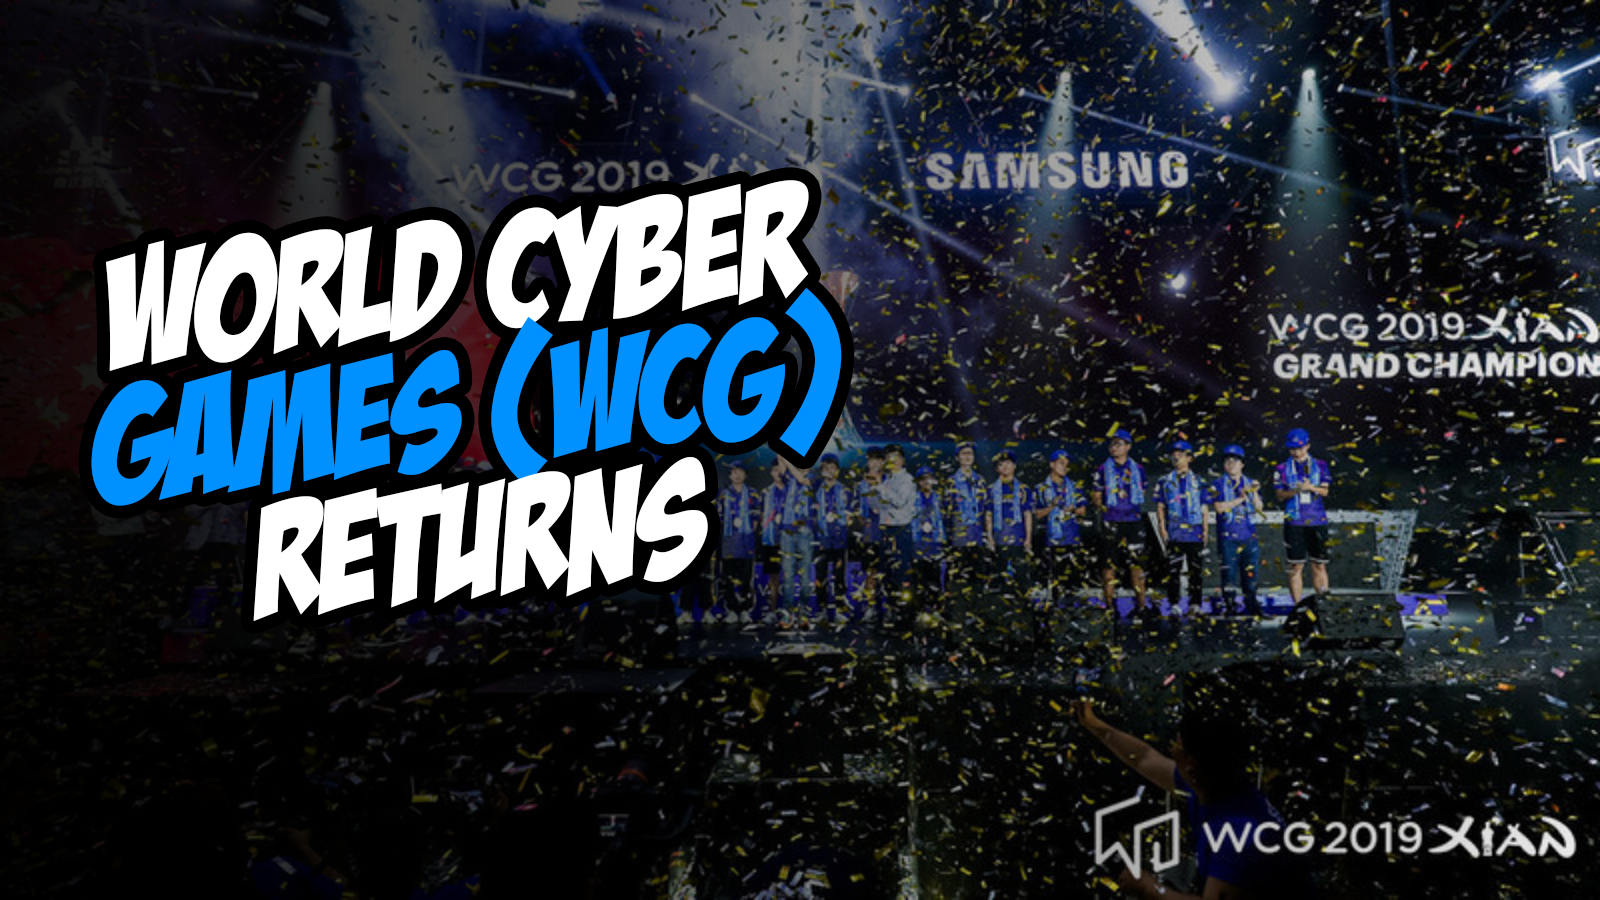 World Cyber Games (WCG) Returns with New Tricks to Reclaim Esports Glory